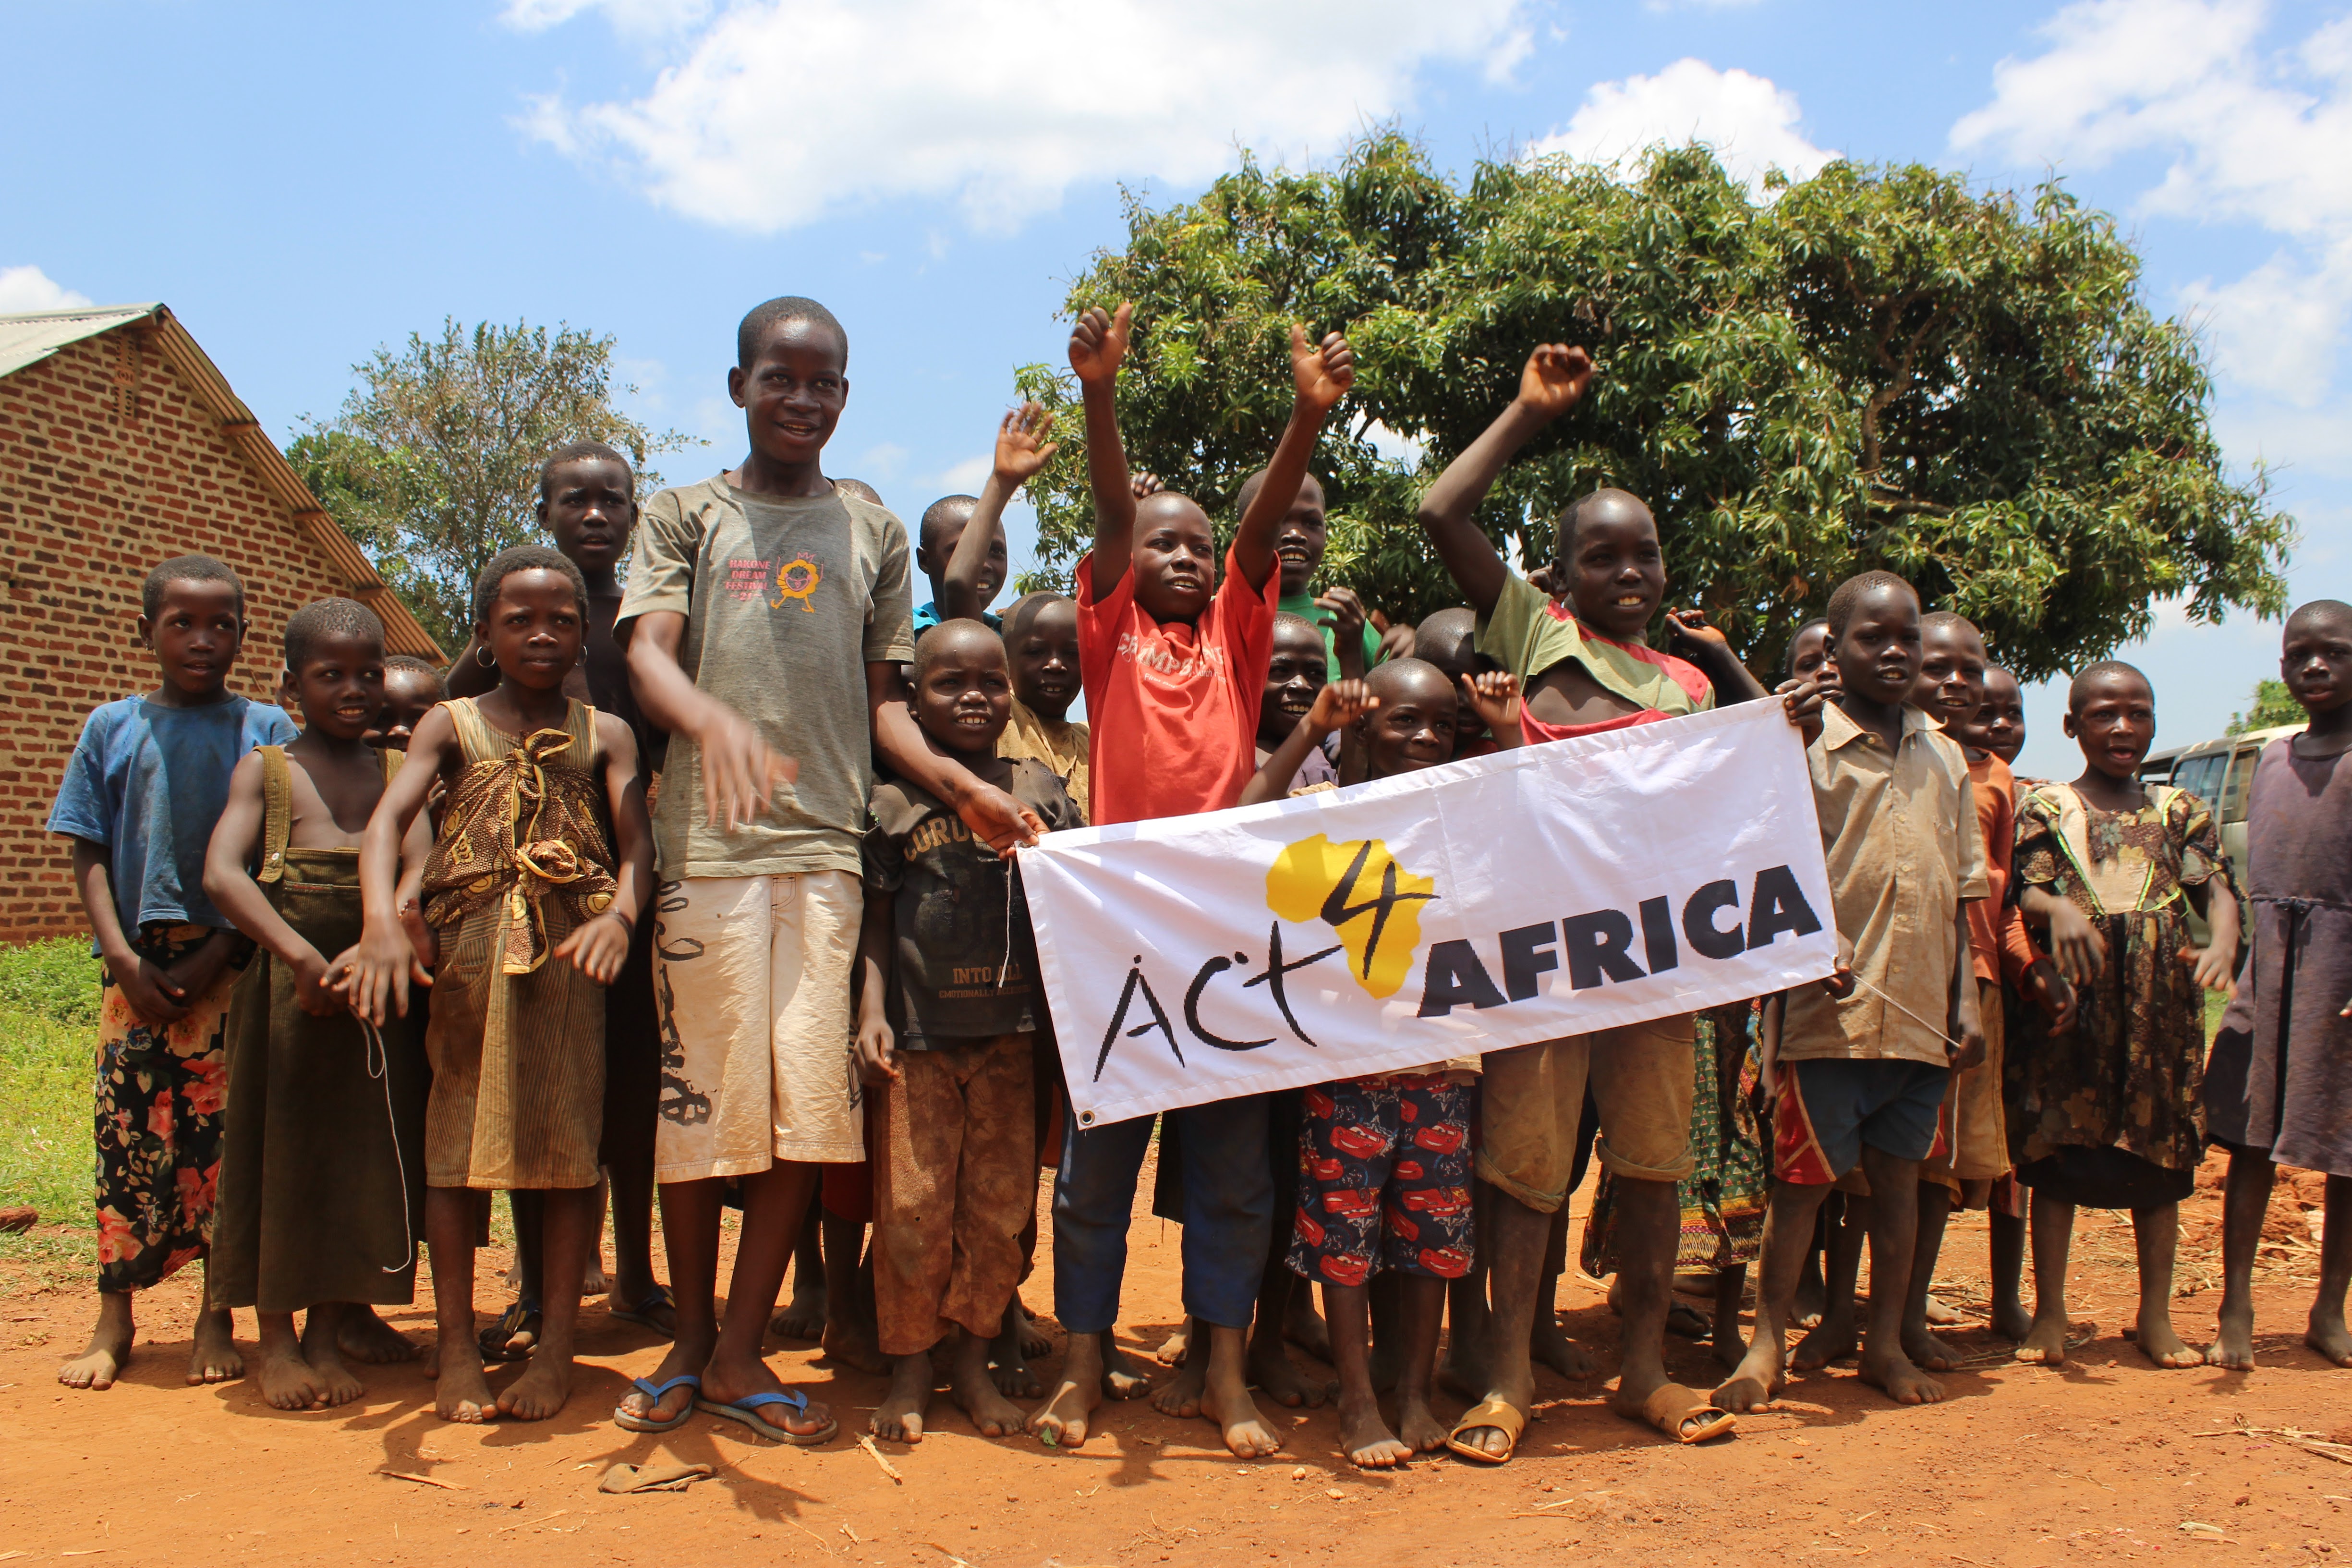 Ugandan children cheer and hold up Act4Africa banner